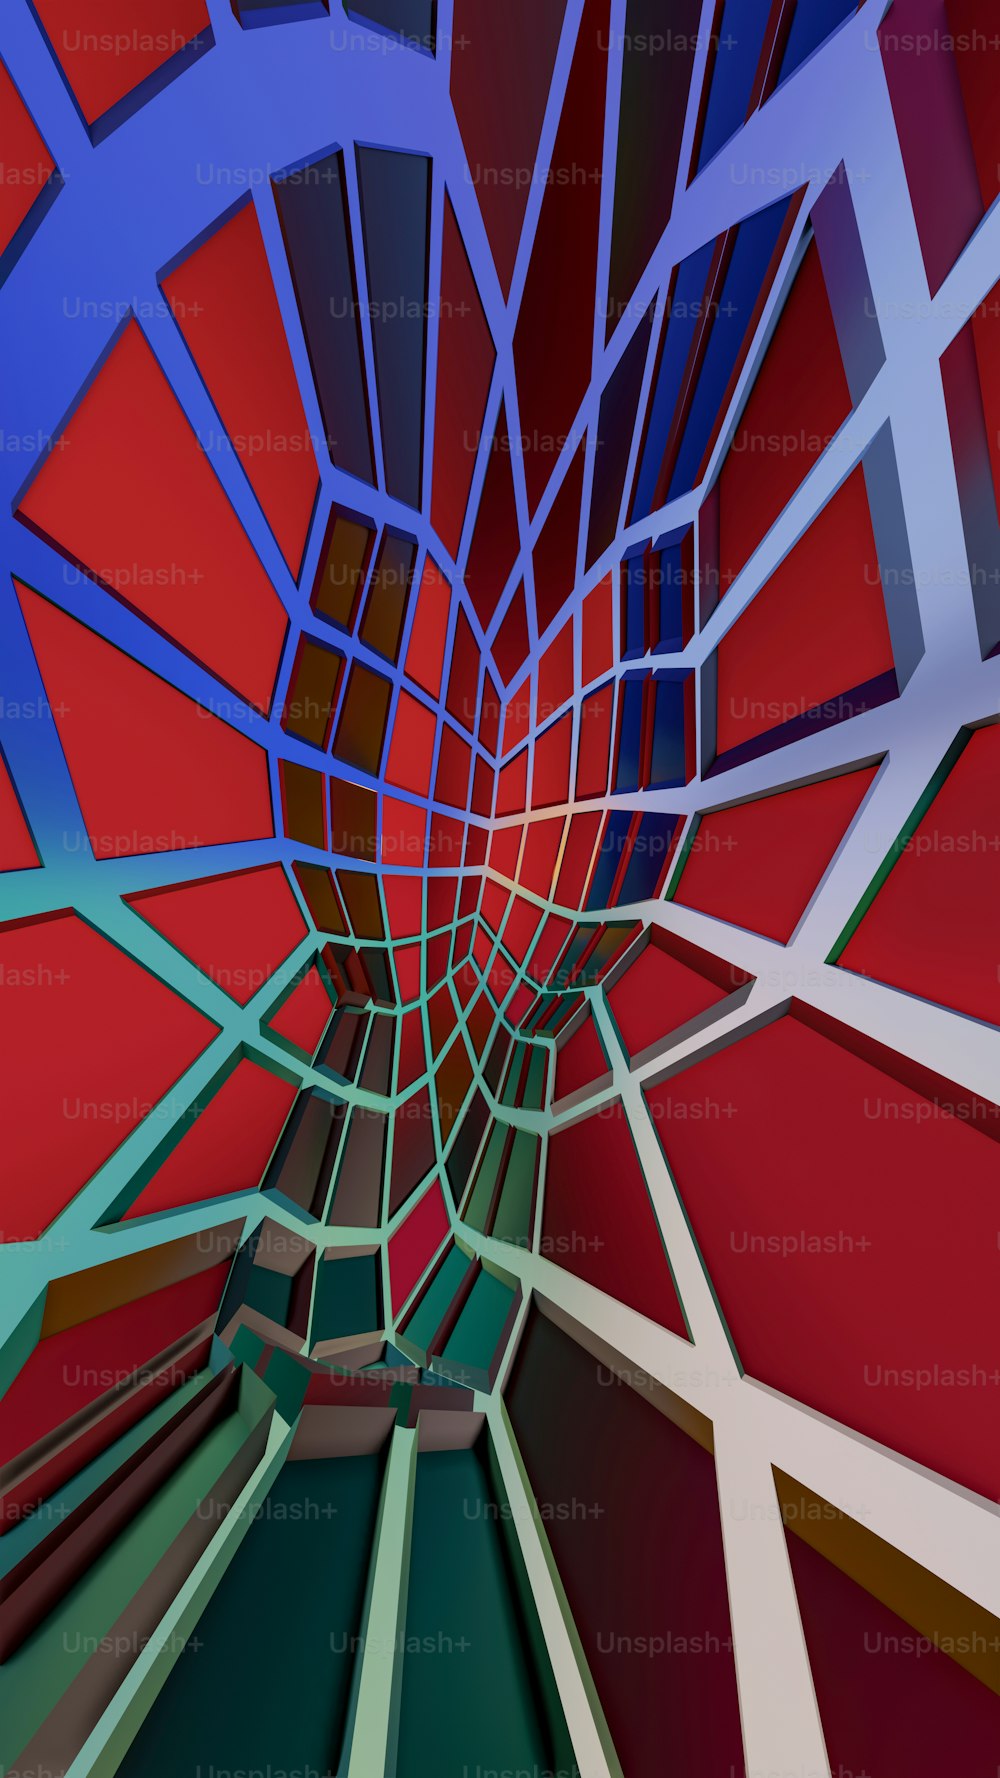 an abstract image of a red and blue structure